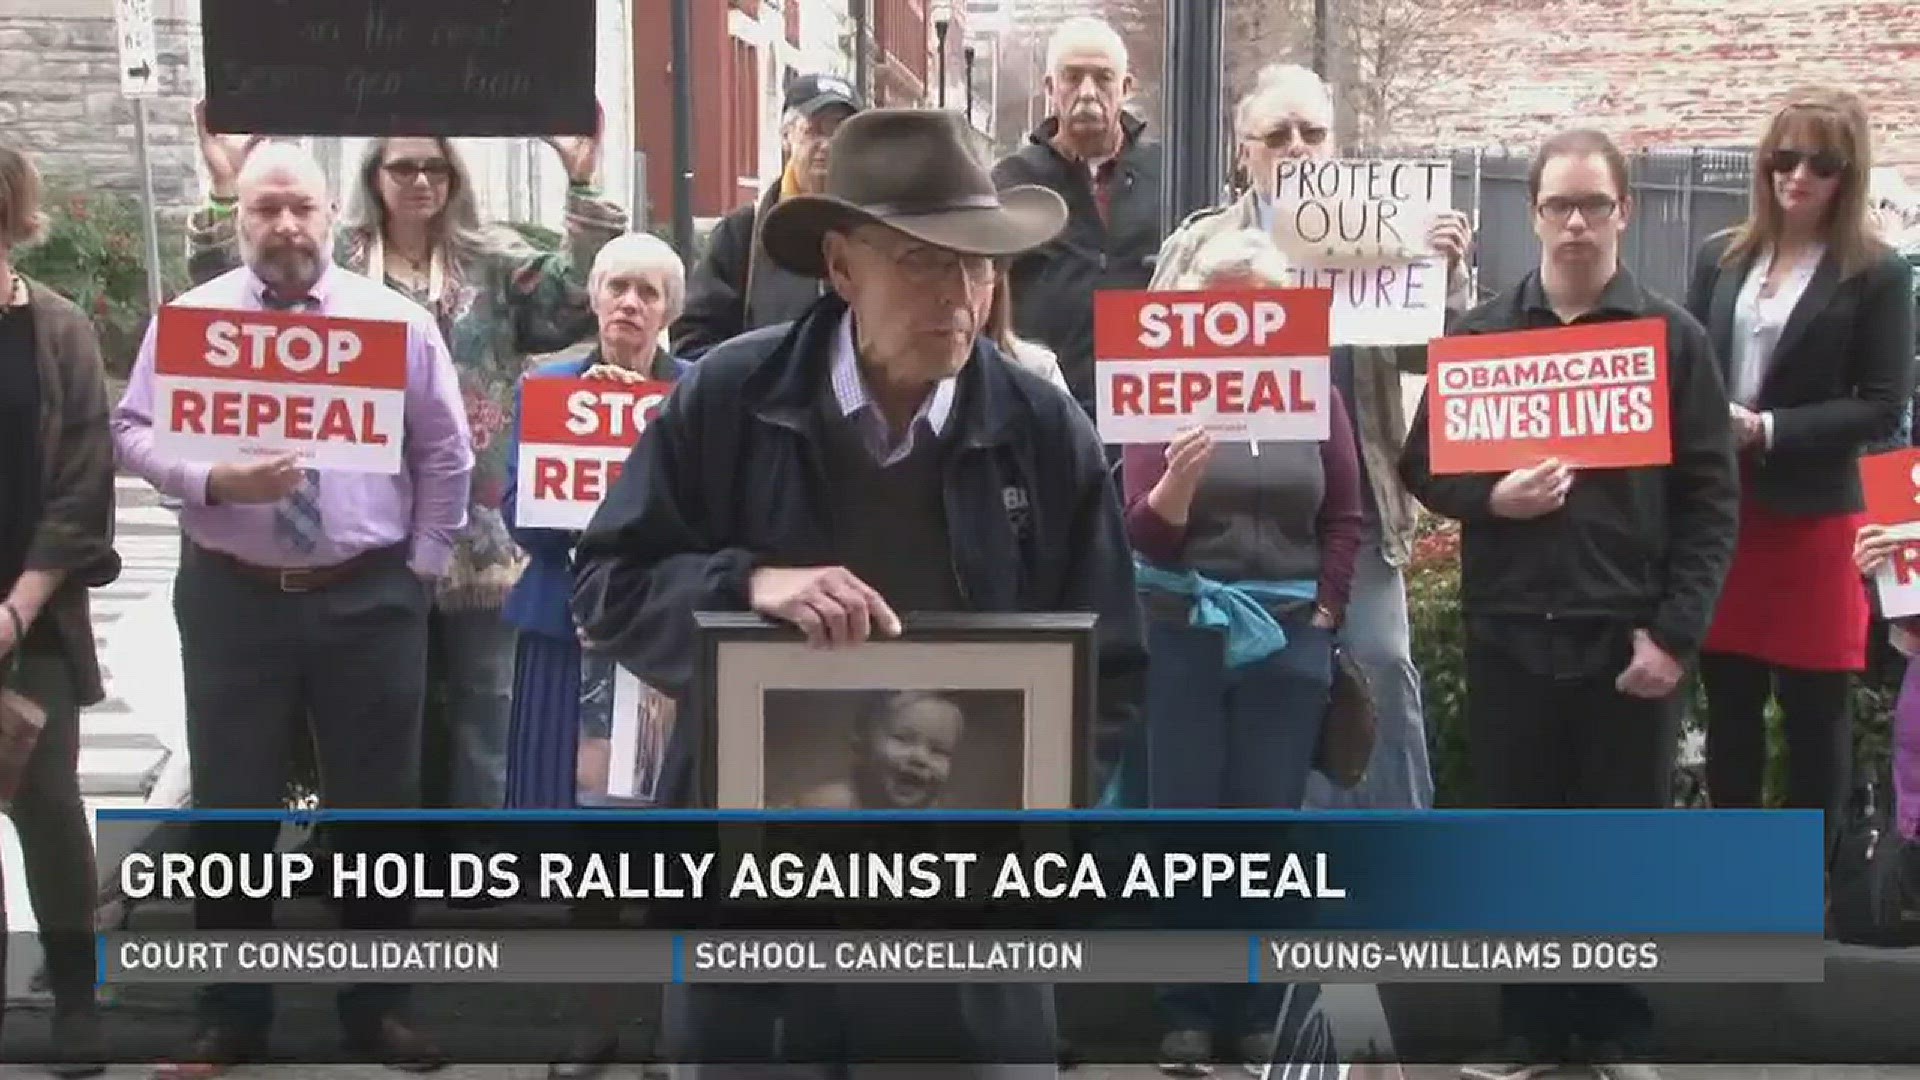 Jan. 19, 2017: A group rallied outside Senator Lamar Alexander's Knoxville office to protest repeal of the Affordable Care Act.